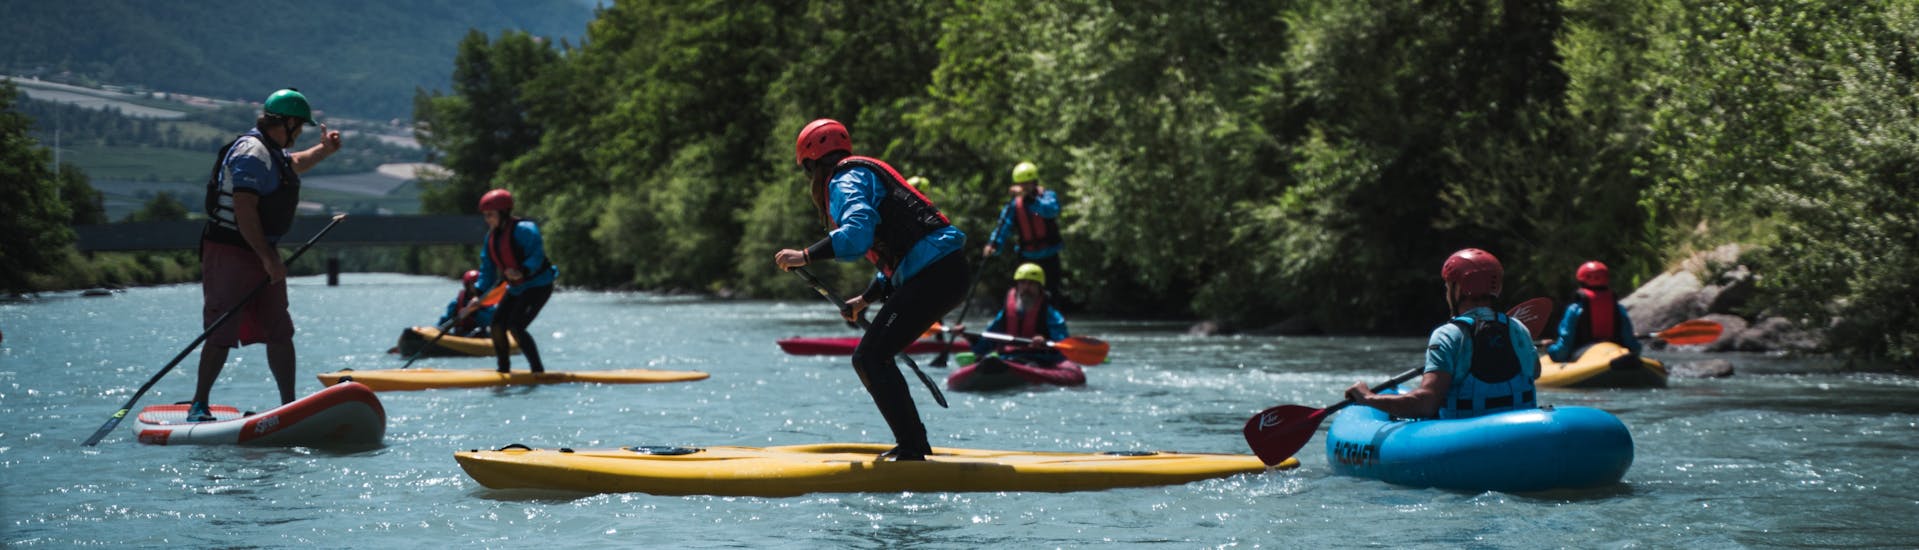 Everyone is learning during the Stand Up Paddling on the Adige in Val Venosta - River Tour with Adventure Südtirol.